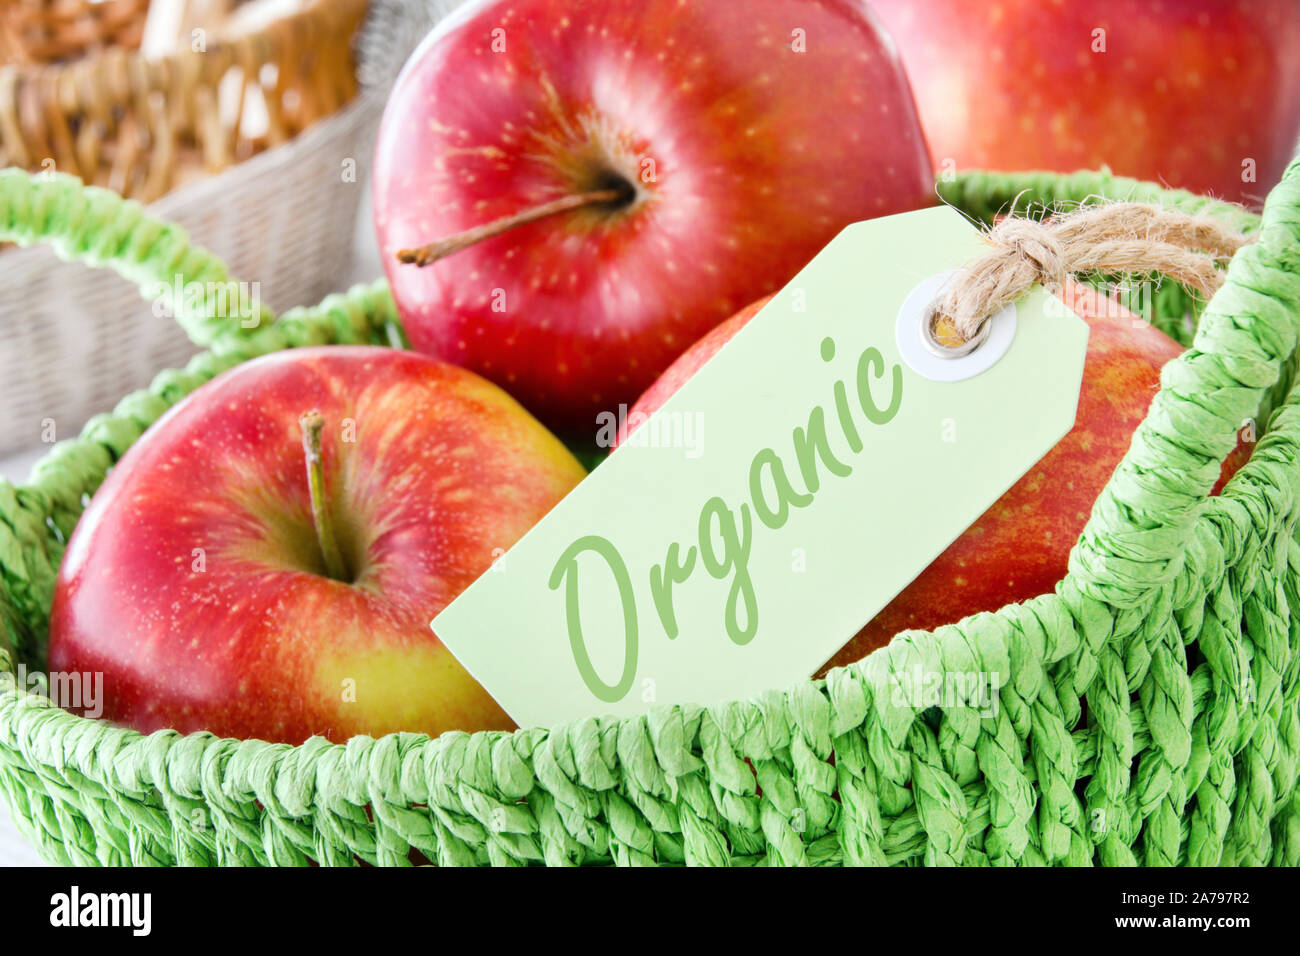 Apples and label in a basket Stock Photo